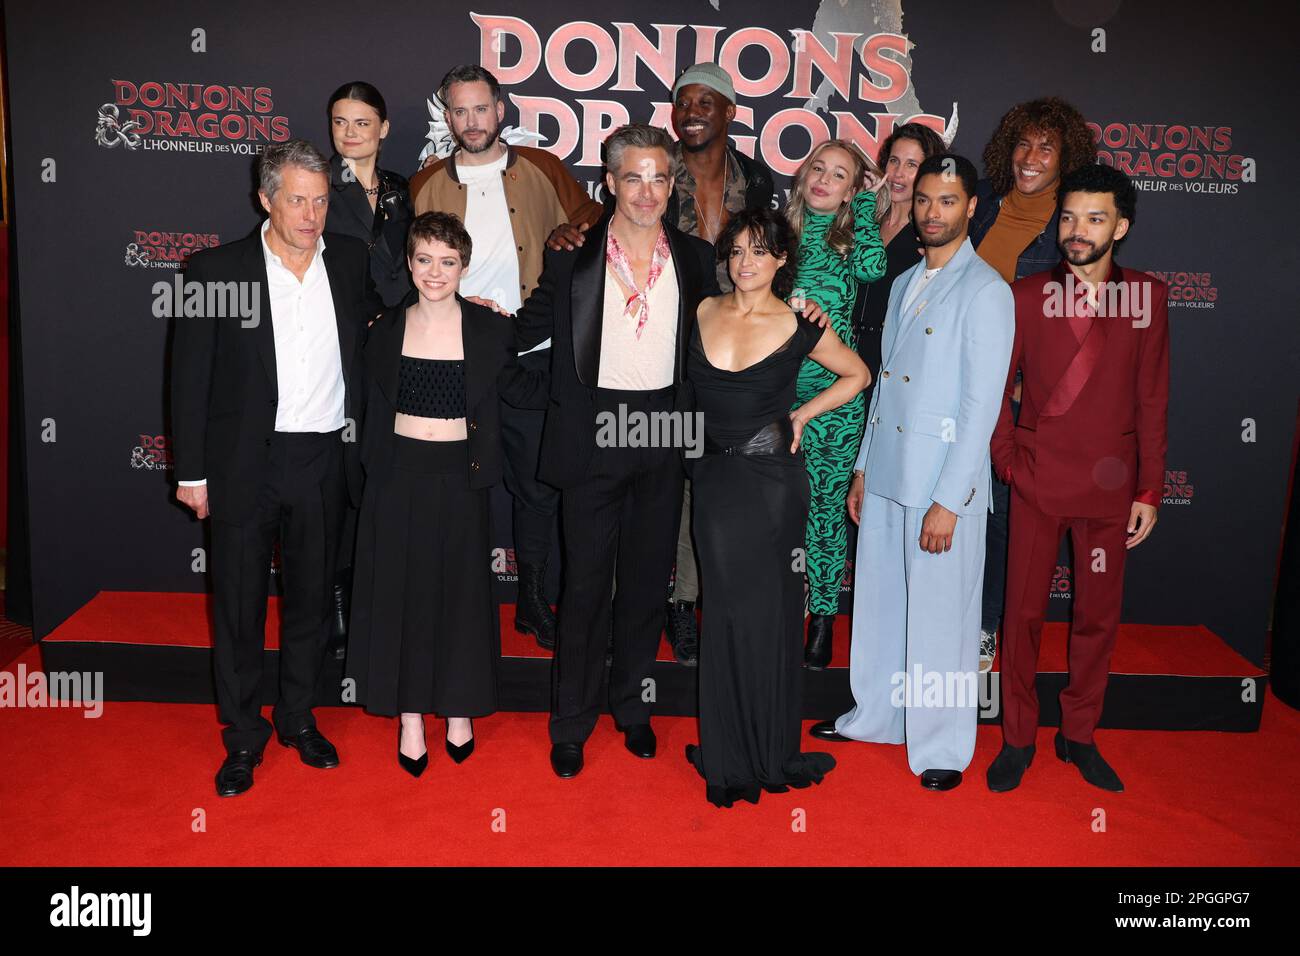 Paris, France. 22nd March, 2023. Hugh Grant, Sophia Lillis, Chris Pine, Michelle Rodriguez, Regé-Jean Page and Justice Smith, Olga Khokhlova, Cyril, Moussa, Cindy Poumeyrol, Clémence Castel and Laurent Maistret attends Dungeons & Dragons Premiere held at Grand Rex on March 22, 2023 in Paris, France. Photo by Jerome Dominé/ABACAPRESS.COM Credit: Abaca Press/Alamy Live News Stock Photo